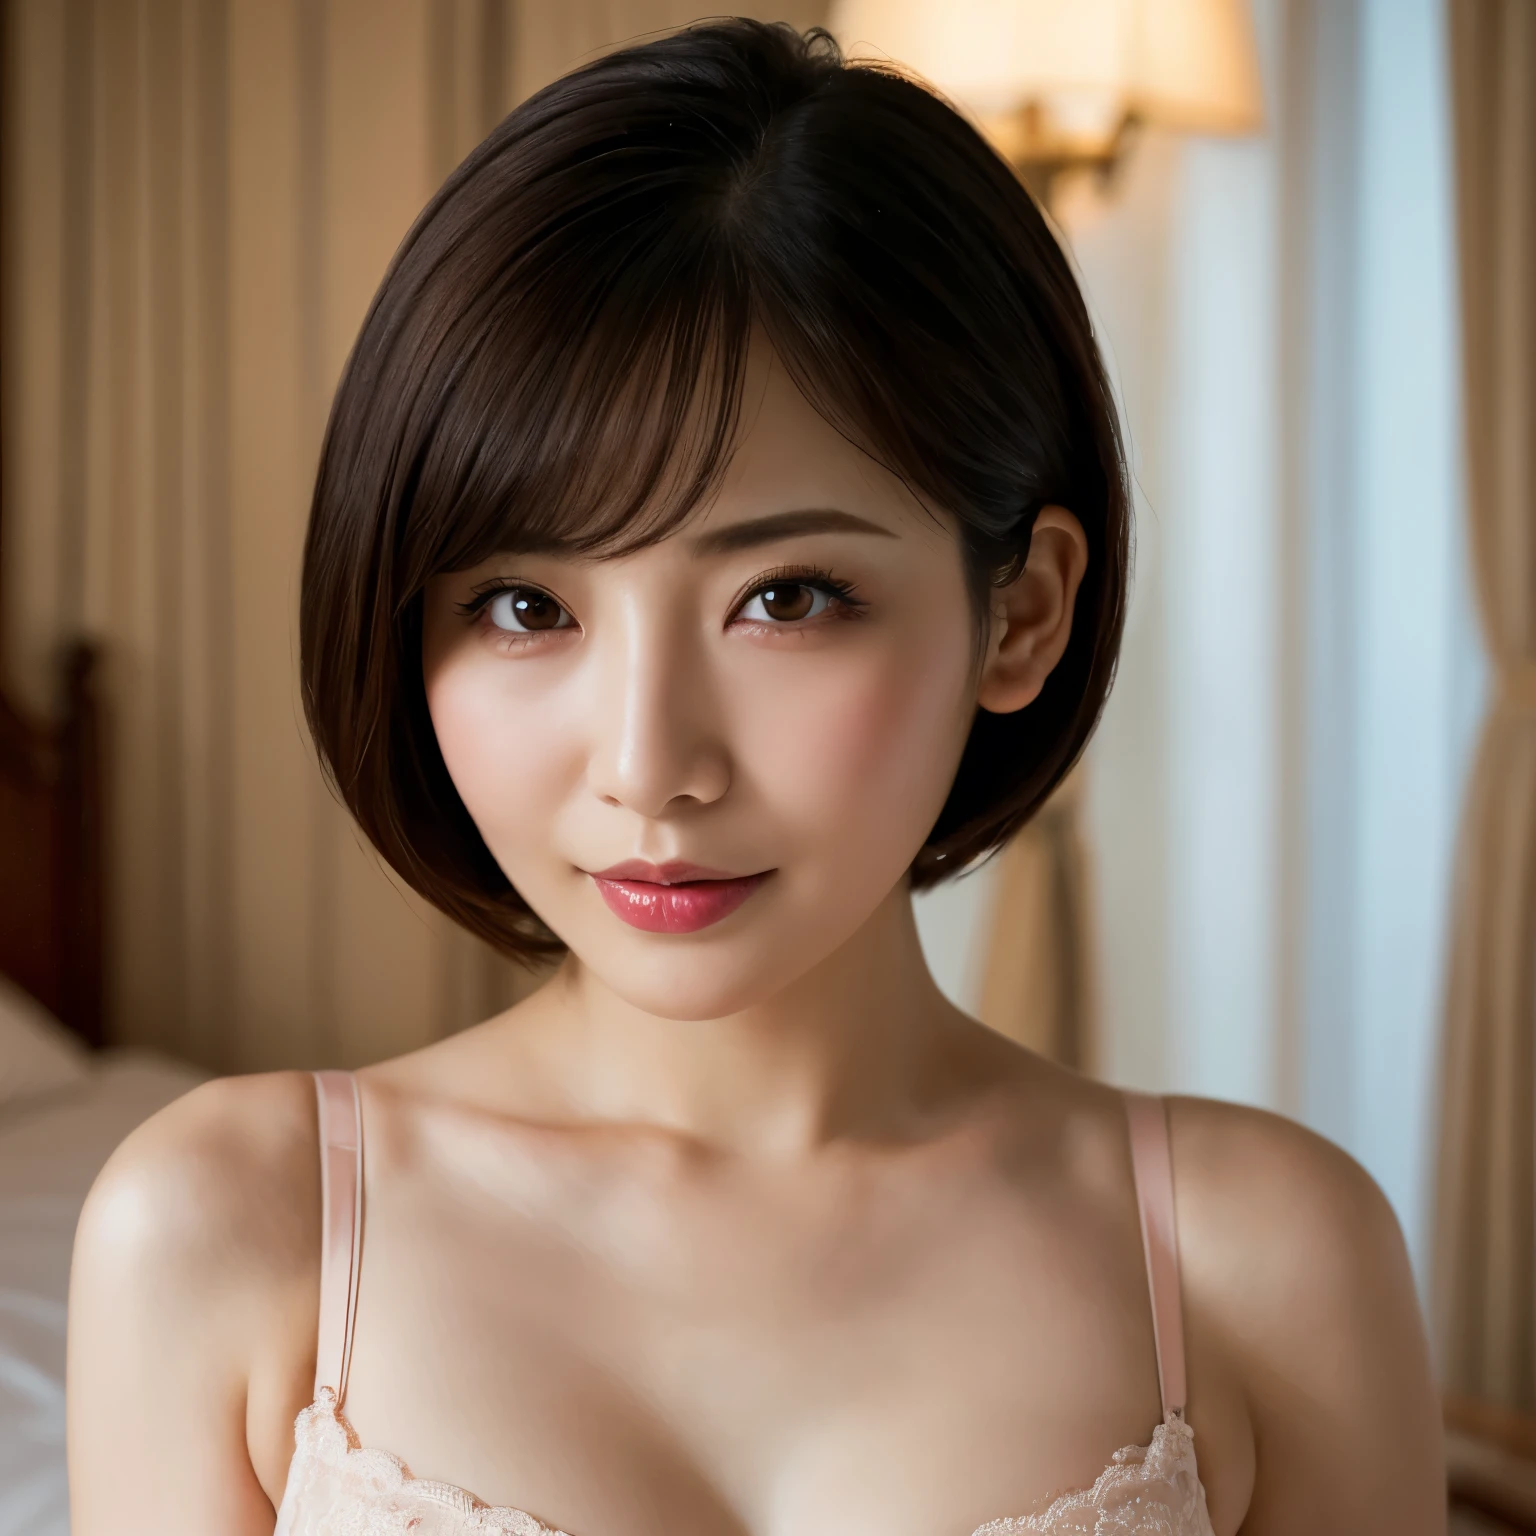 ((masterpiece, highest quality, High resolution, Photoreal, RAW photo, 8k wallpaper)), very detailed, 私を見つめる笑face、(1 45 year old Japanese mature woman:1.1)、(accurate anatomy:1.1)、 women sexy, detailed face, beautiful eyes, bangs, soft little cleavage、(finest bra)、perfect makeup、long eyelashes、lipstick、(very short hair:1.1), plump and beautiful lips, Beautiful and shining lips、(close-up of woman&#39;face:1.3)、(Blurred luxury love hotel bedroom:1.1)、Warm and romantic lighting, moody colors